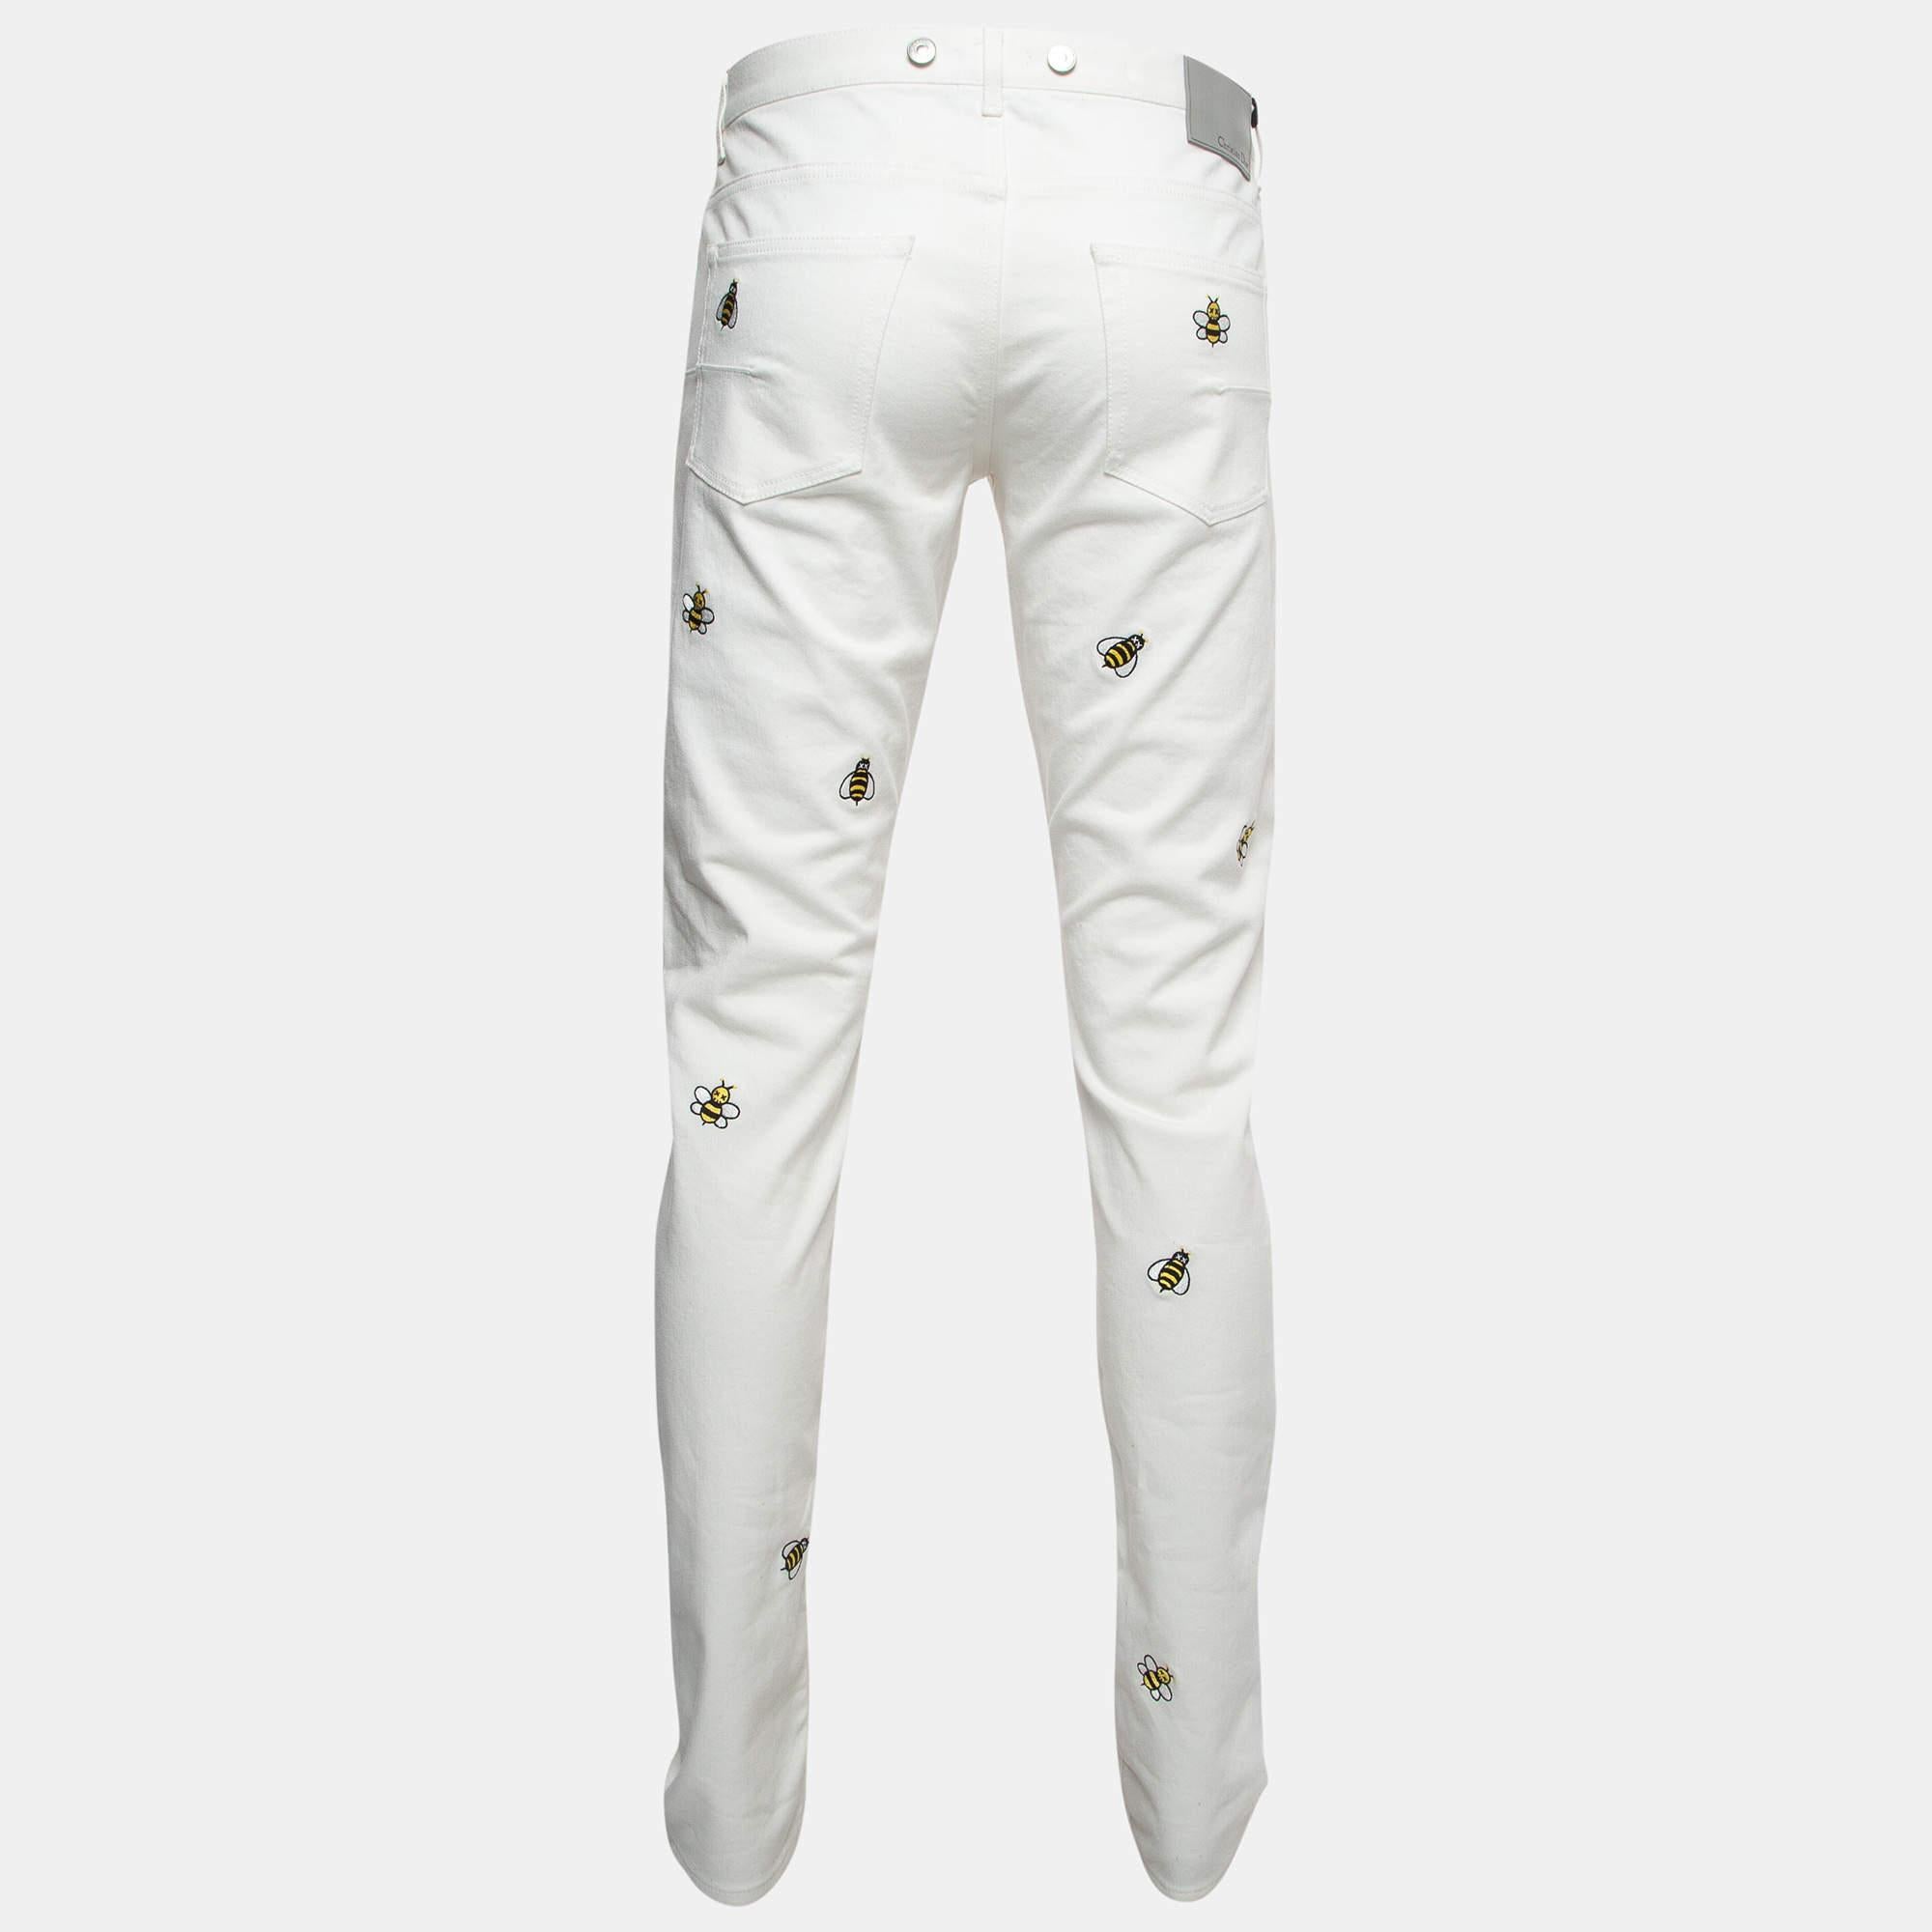 These Dior X Kaws white jeans are a must-have wardrobe essential. These jeans for men can be dressed both up and down for looks that are either casual and comfy or chic and fashionable.

